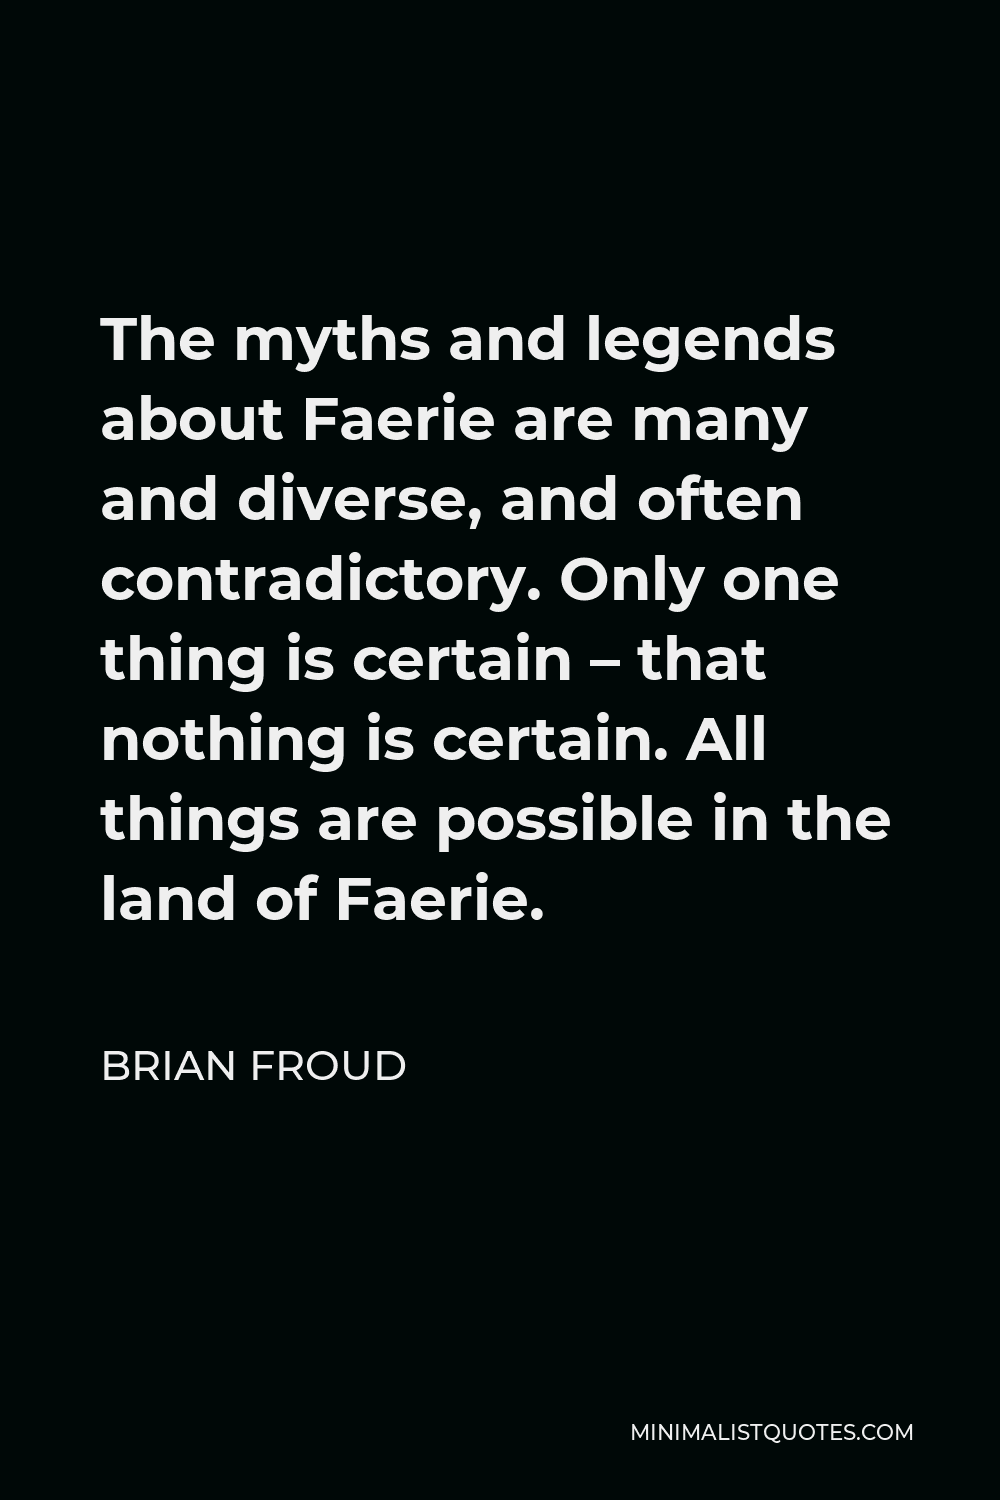 Brian Froud Quote - The myths and legends about Faerie are many and diverse, and often contradictory. Only one thing is certain – that nothing is certain. All things are possible in the land of Faerie.